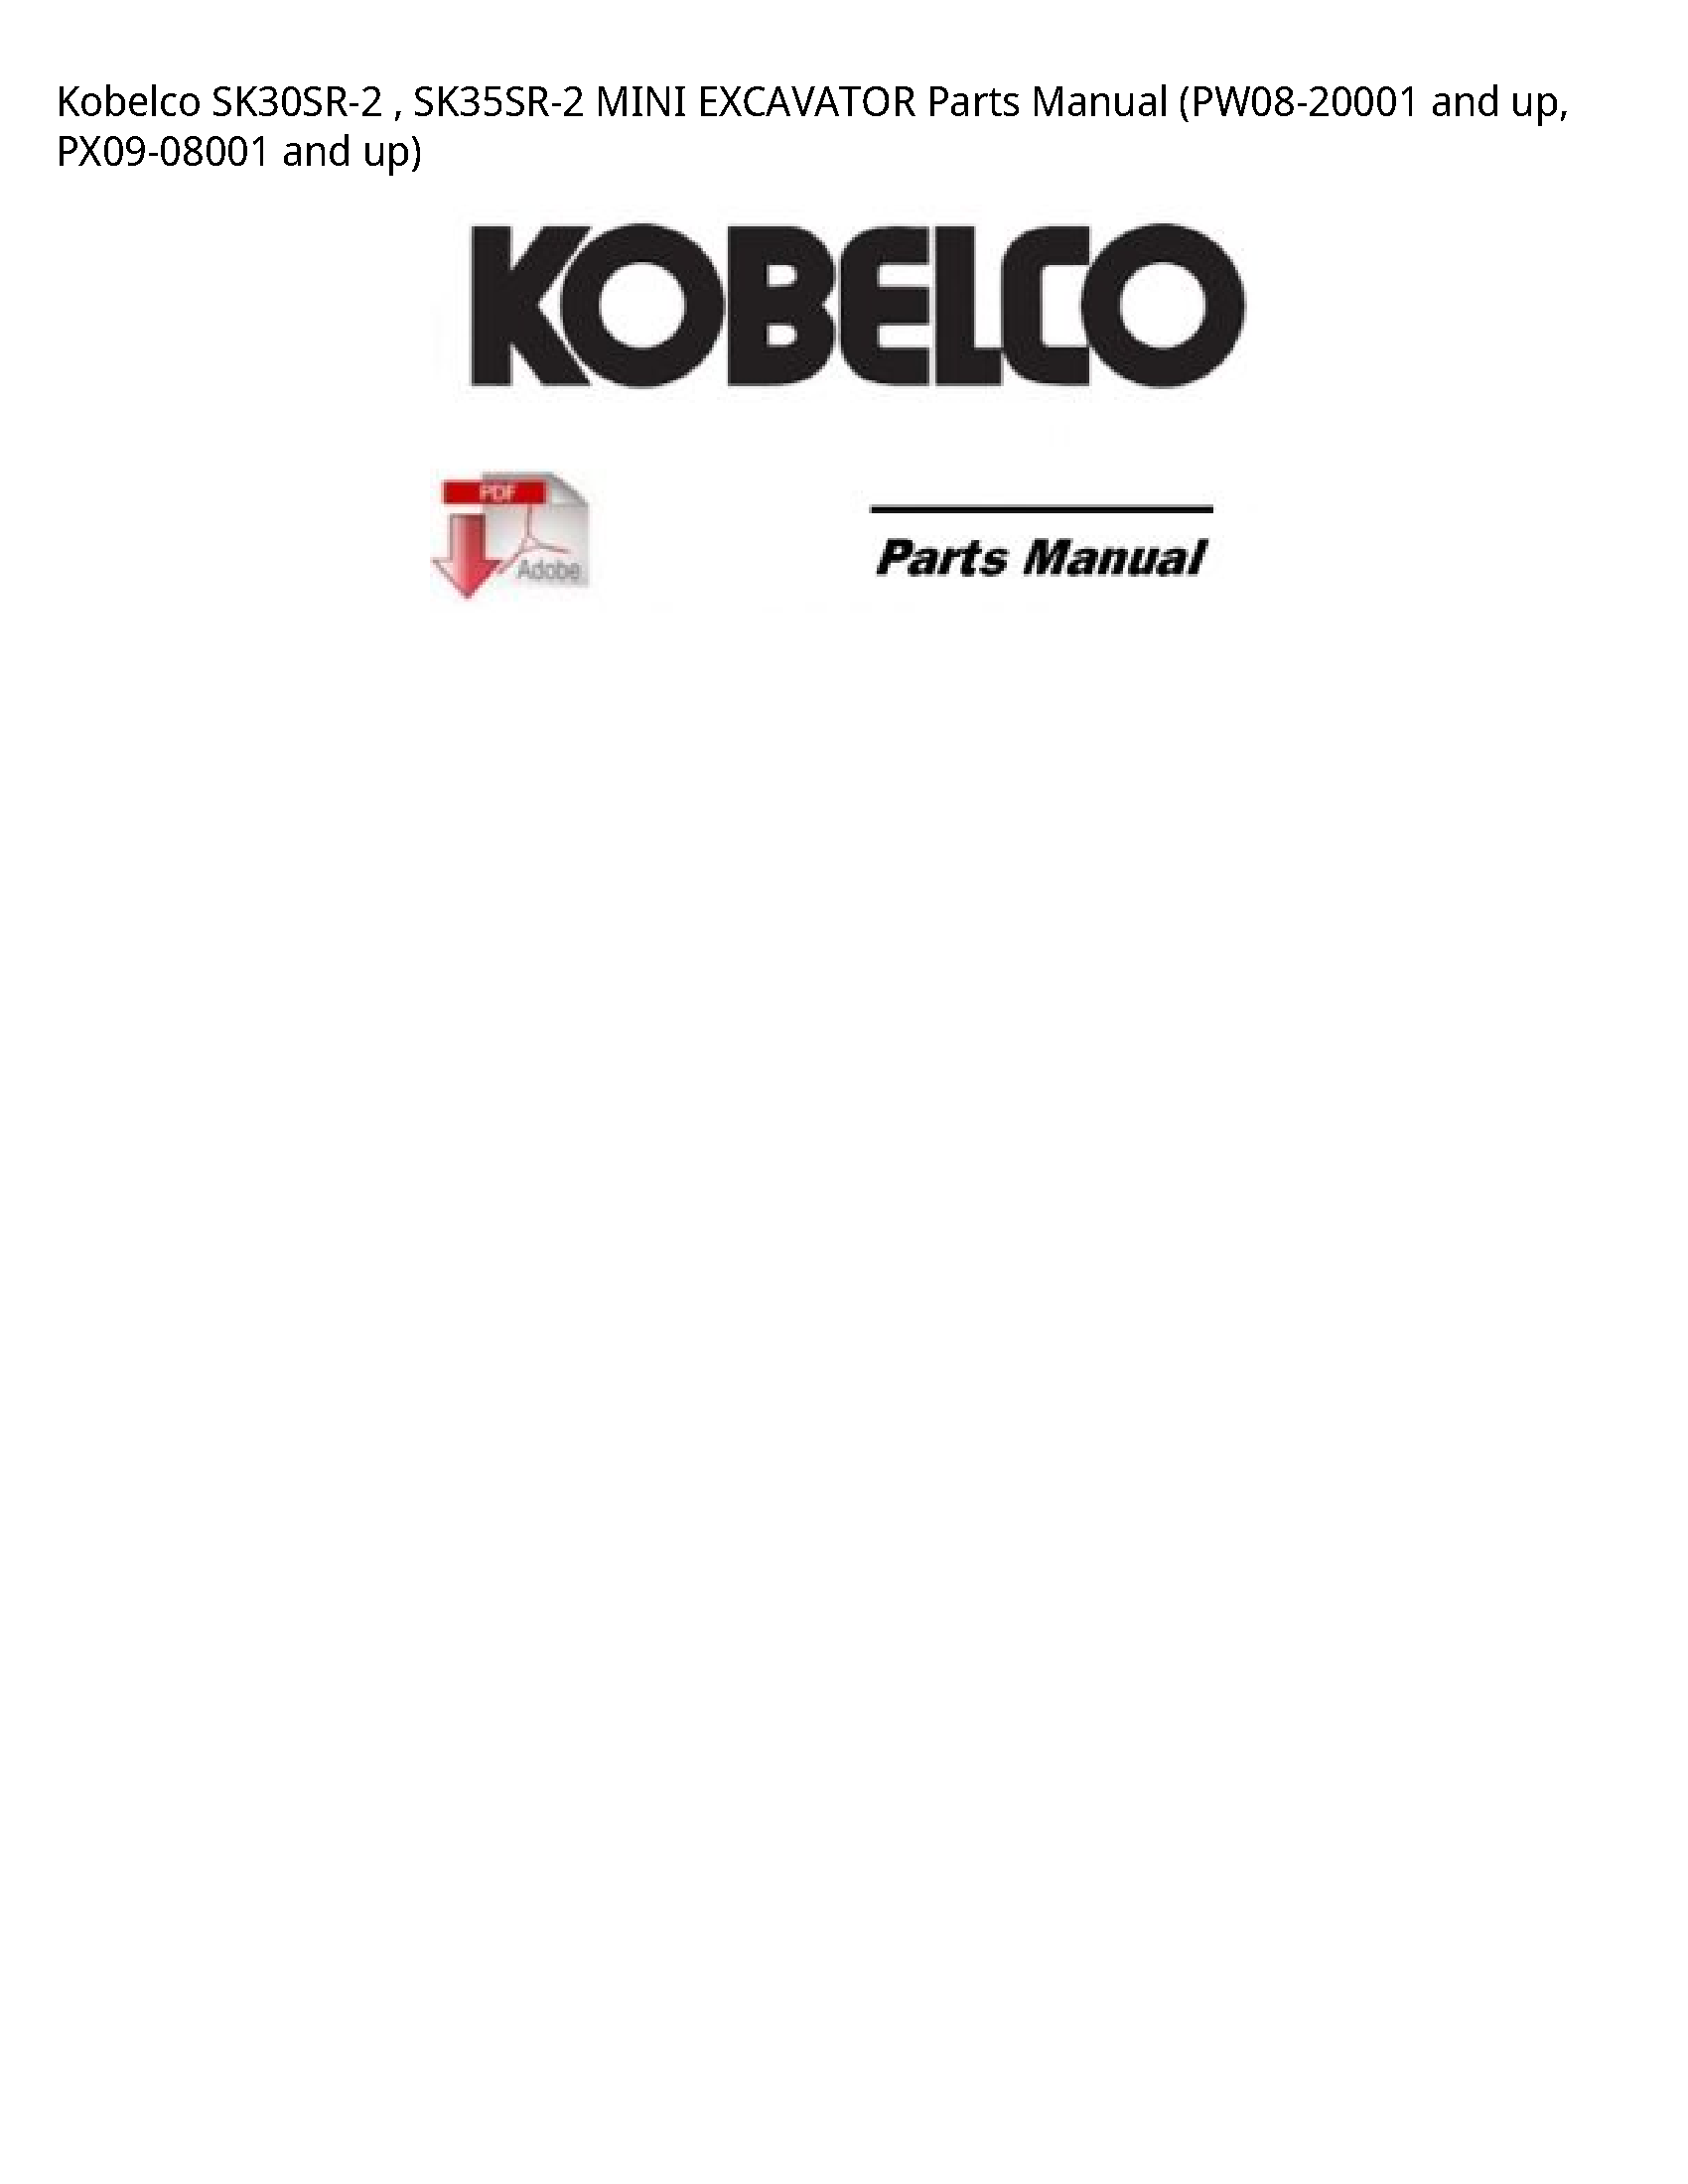 Kobelco SK30SR-2   SK35SR-2 MINI EXCAVATOR Parts Manual (PW08-20001 and up  PX09-08001 and up)